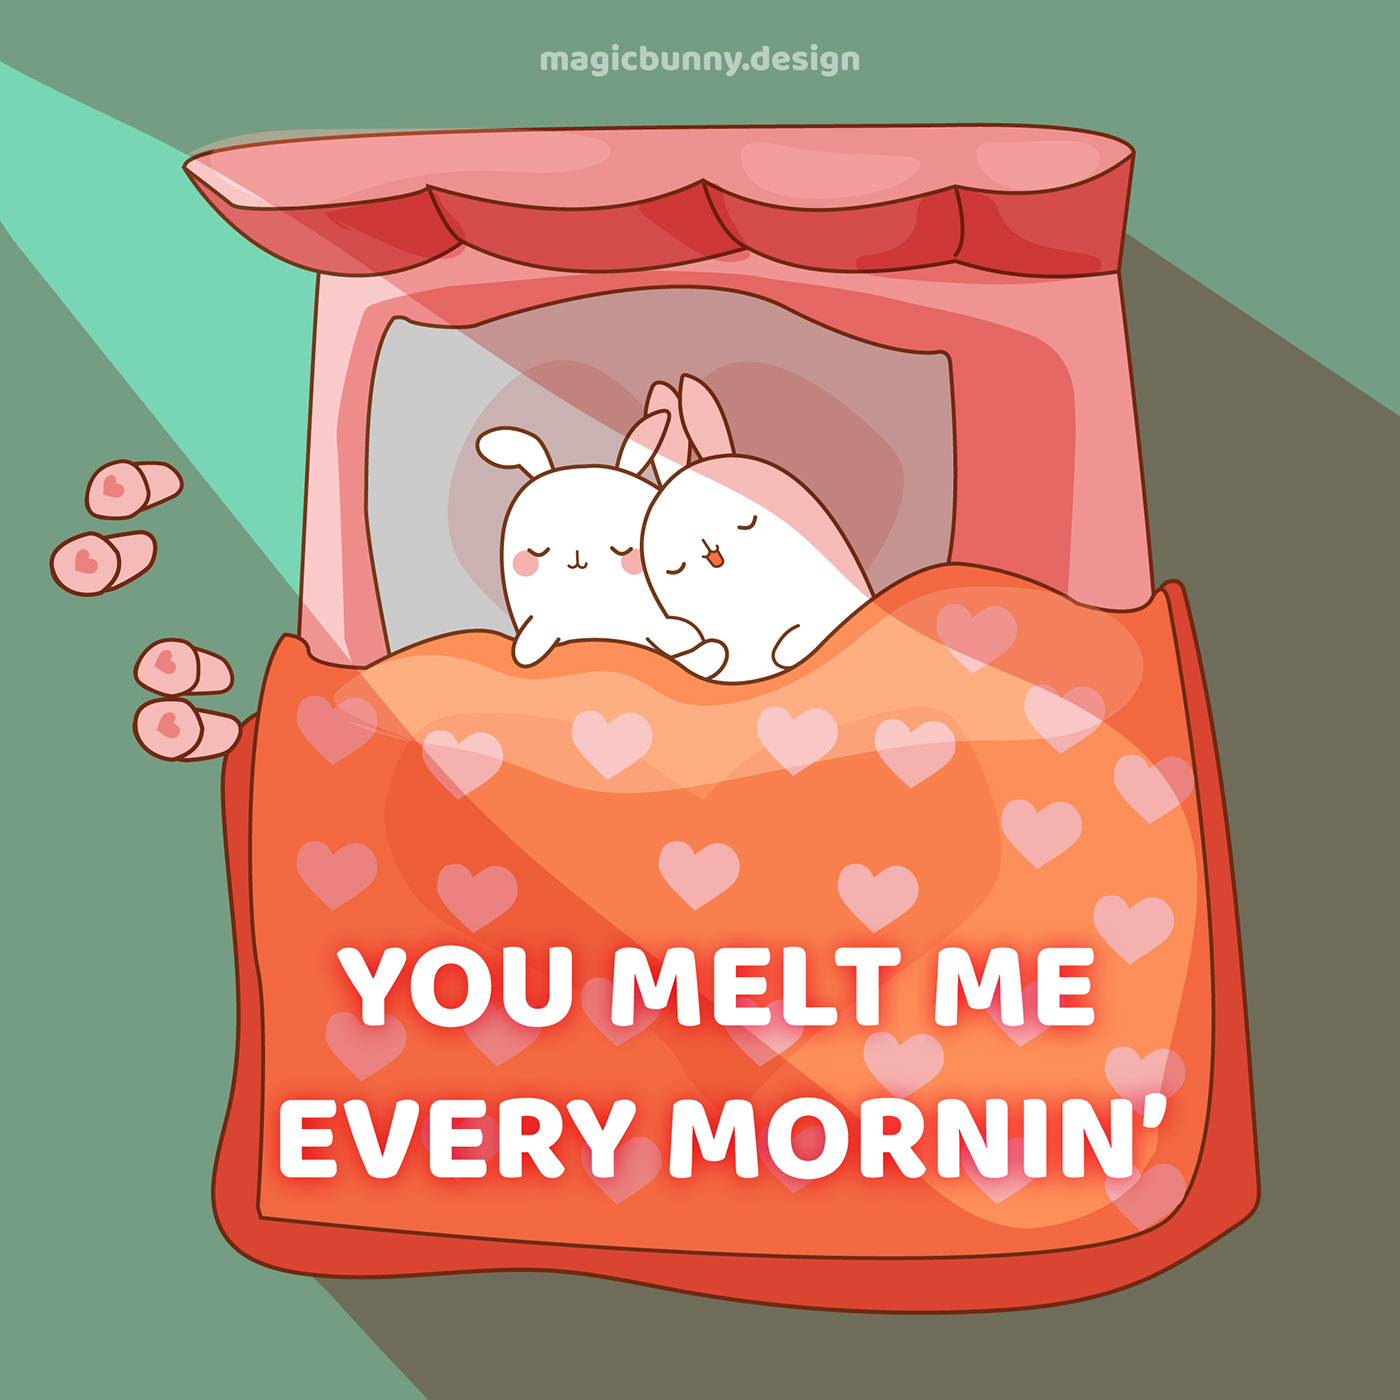 This cutevector  illustration was made in adobe illustrator representing a bunny love story. Enjoy!